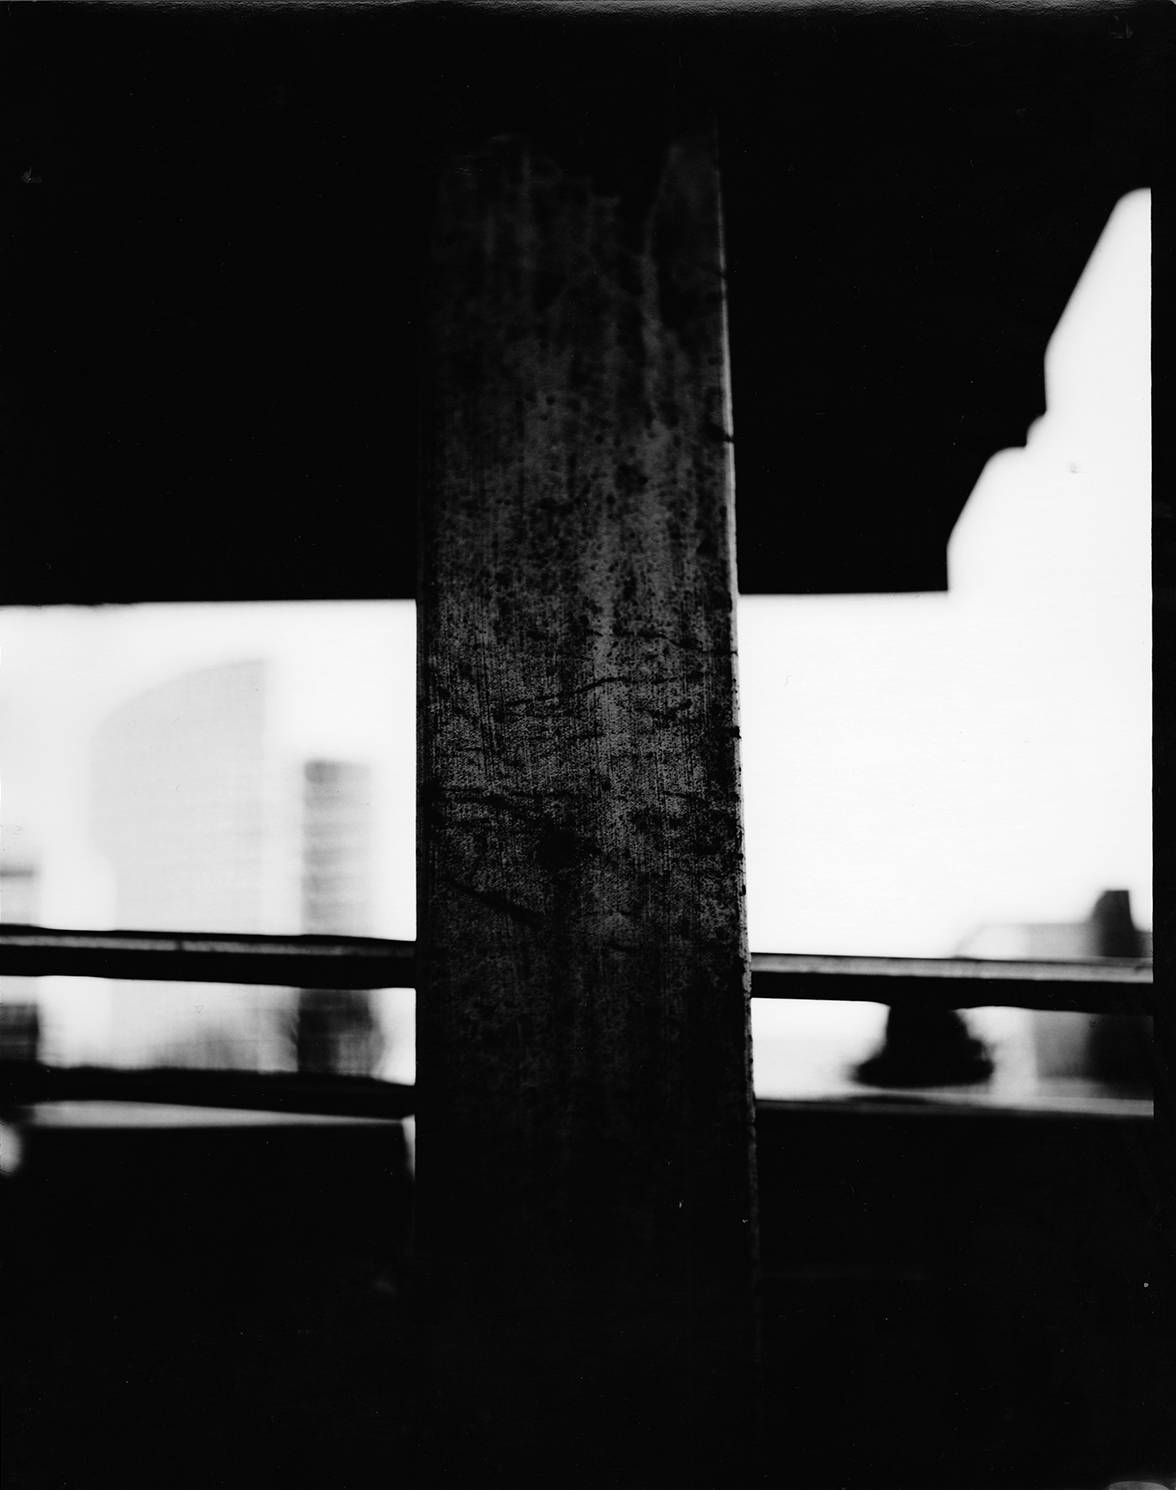 concrete column with blurry buildings in background in high contrast analog black and white